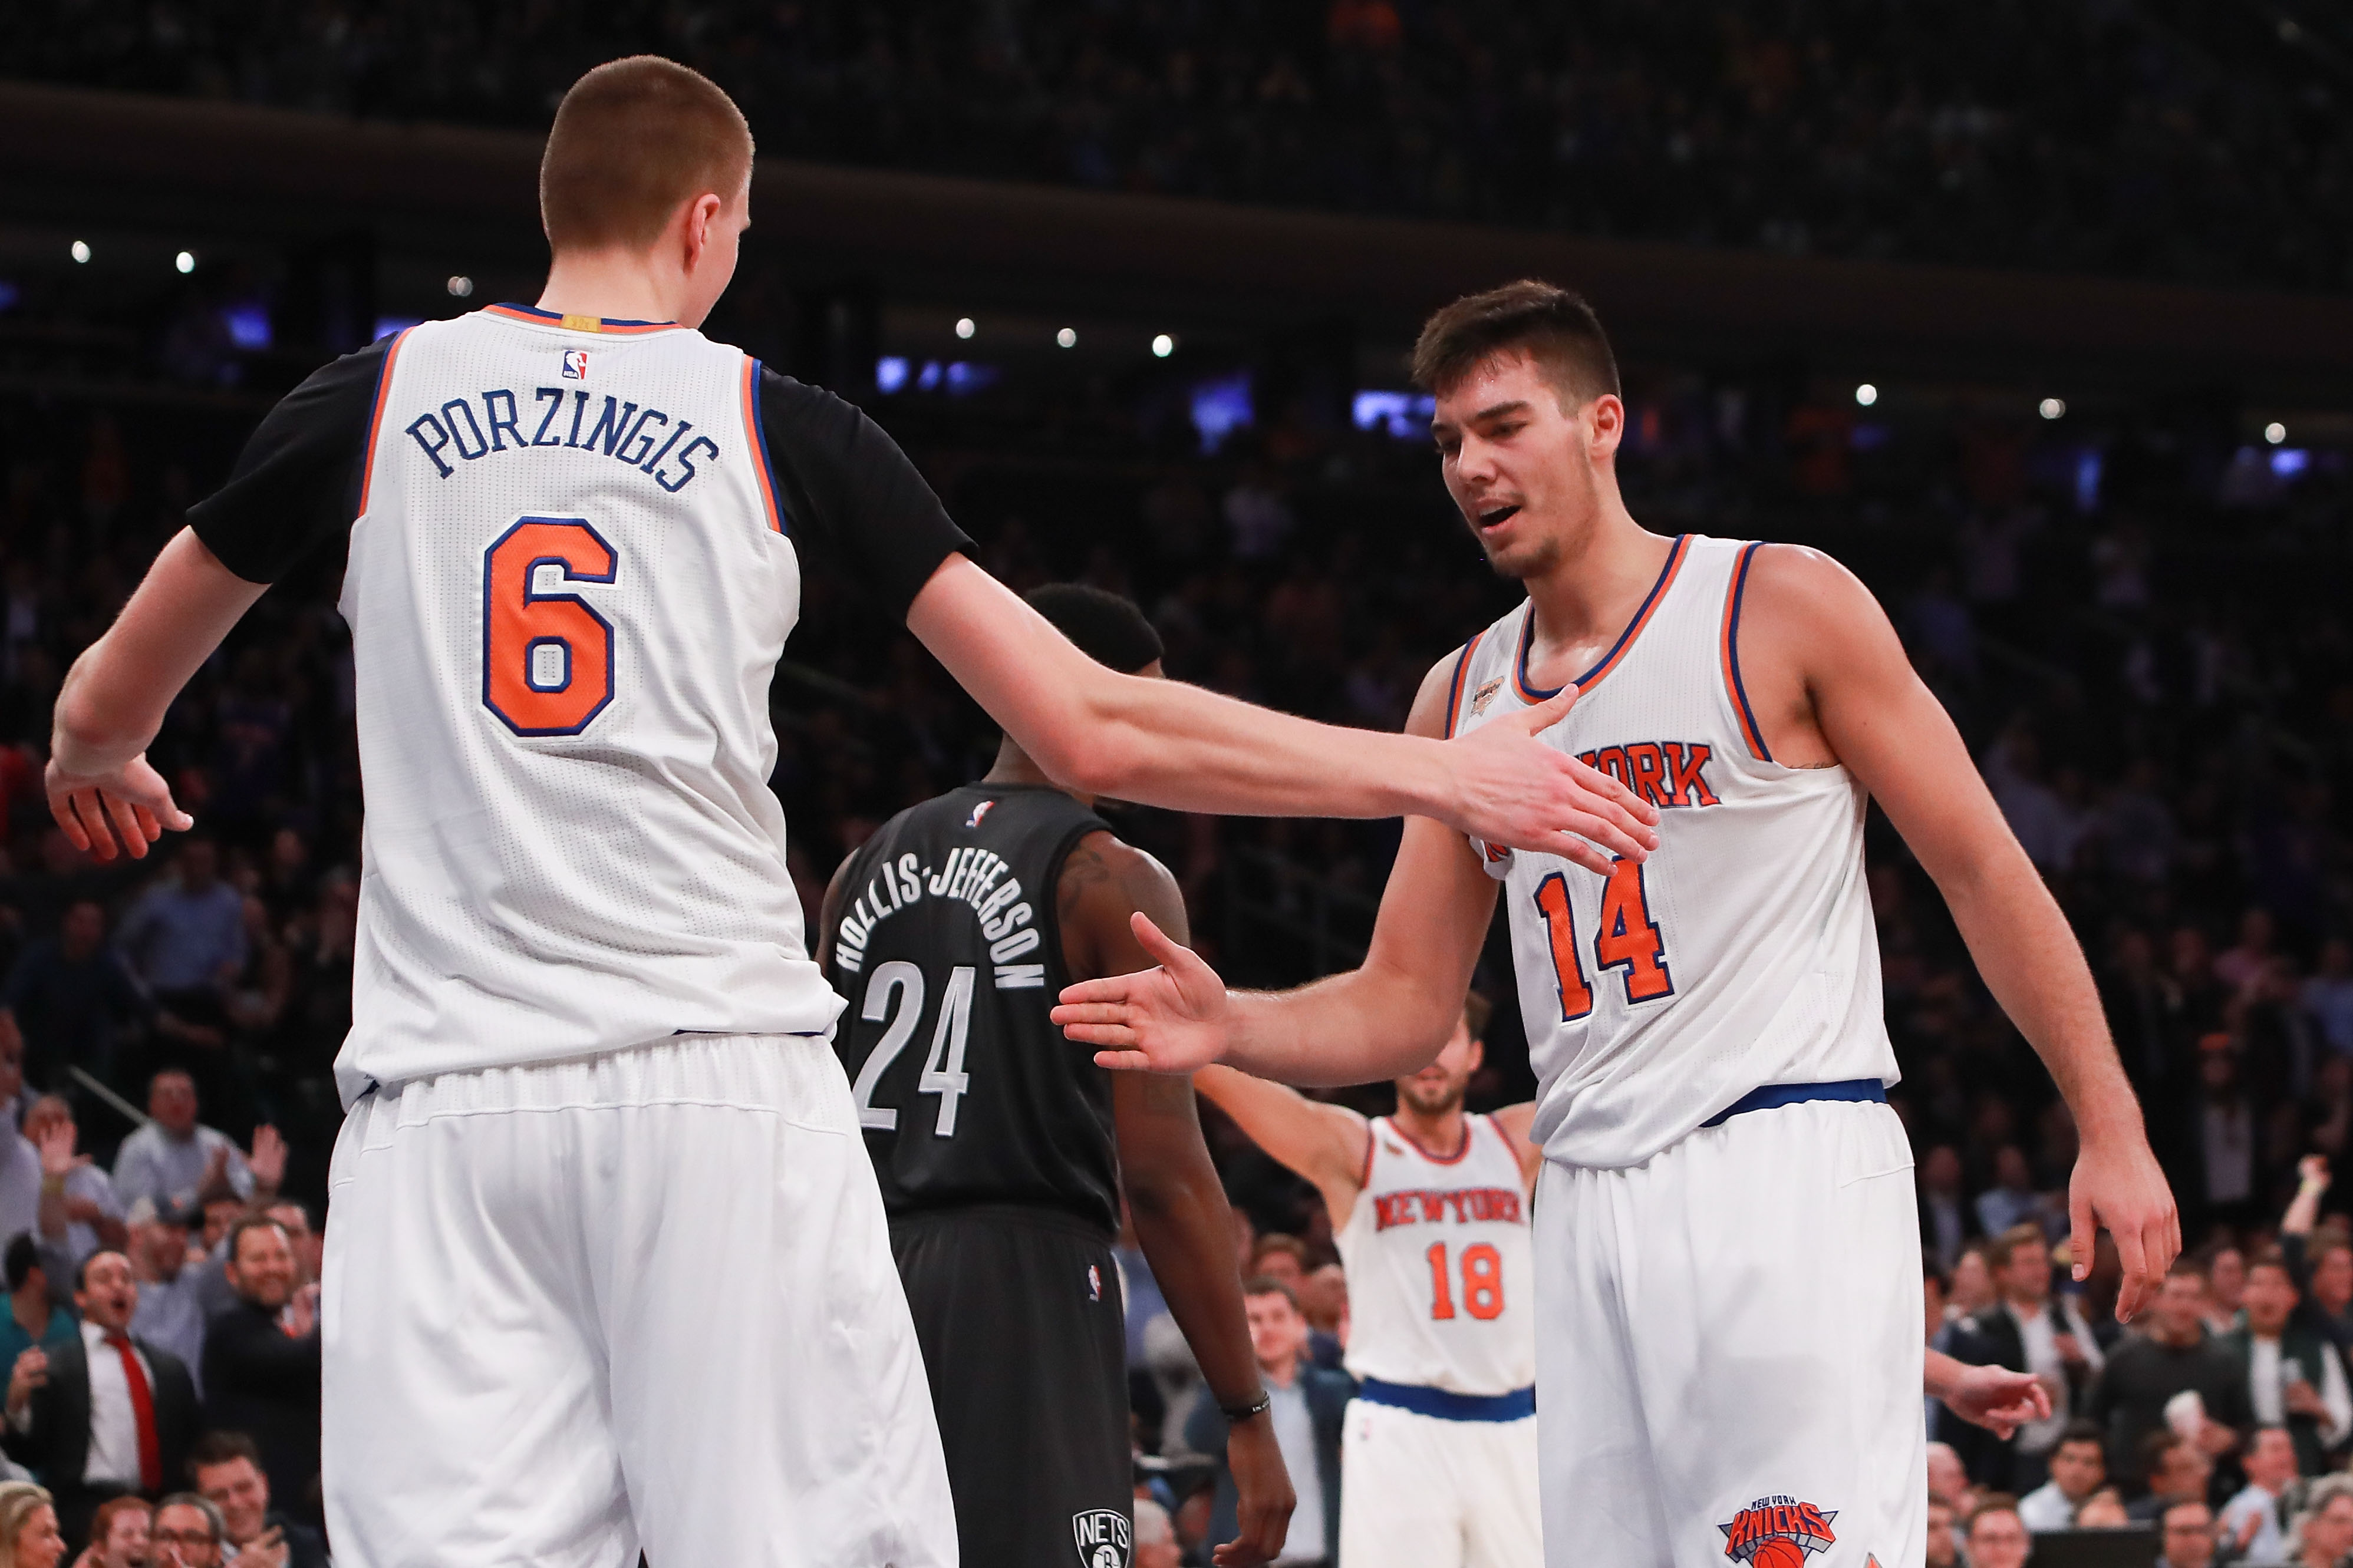 NEW YORK, NY - NOVEMBER 09: Kristaps Porzingis #6 and Willy Hernangomez #14 of the New York Knicks react against the Brooklyn Nets during the second half at Madison Square Garden on November 9, 2016 in New York City. NOTE TO USER: User expressly acknowledges and agrees that, by downloading and or using this photograph, User is consenting to the terms and conditions of the Getty Images License Agreement. (Photo by Michael Reaves/Getty Images)